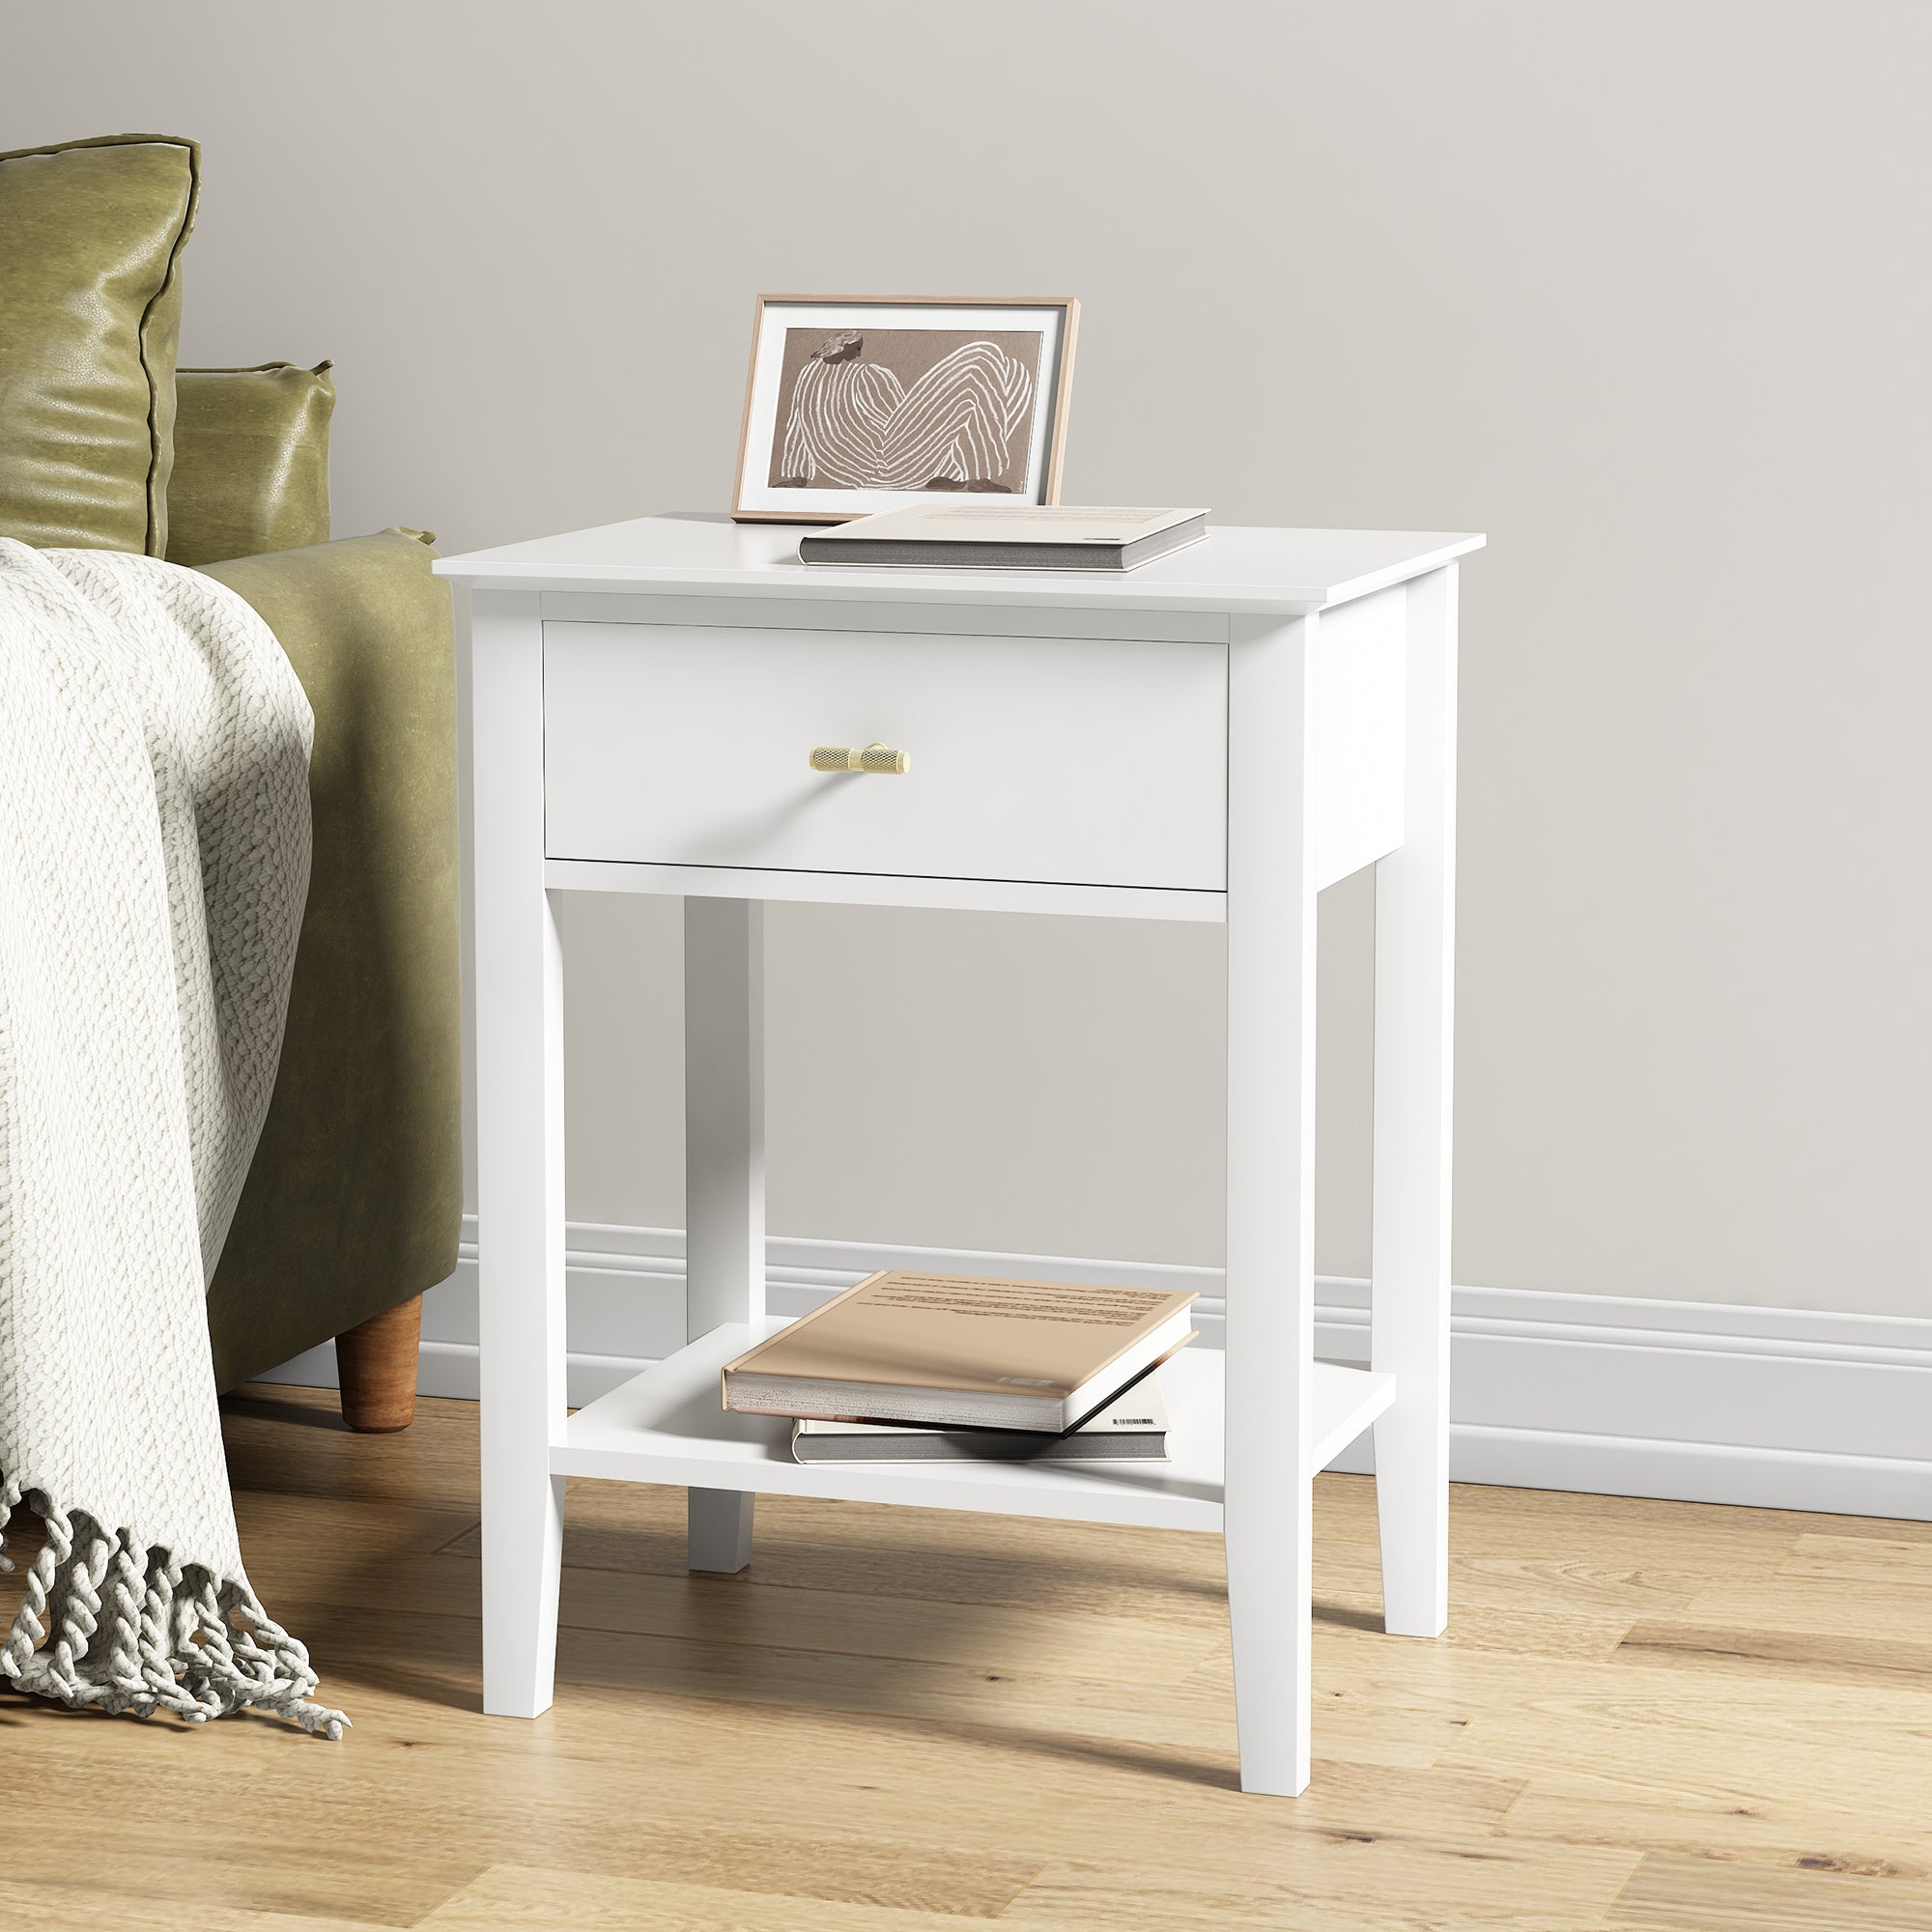 Harper Side Table: Stylish Storage for Beside Your Bed or Sofa